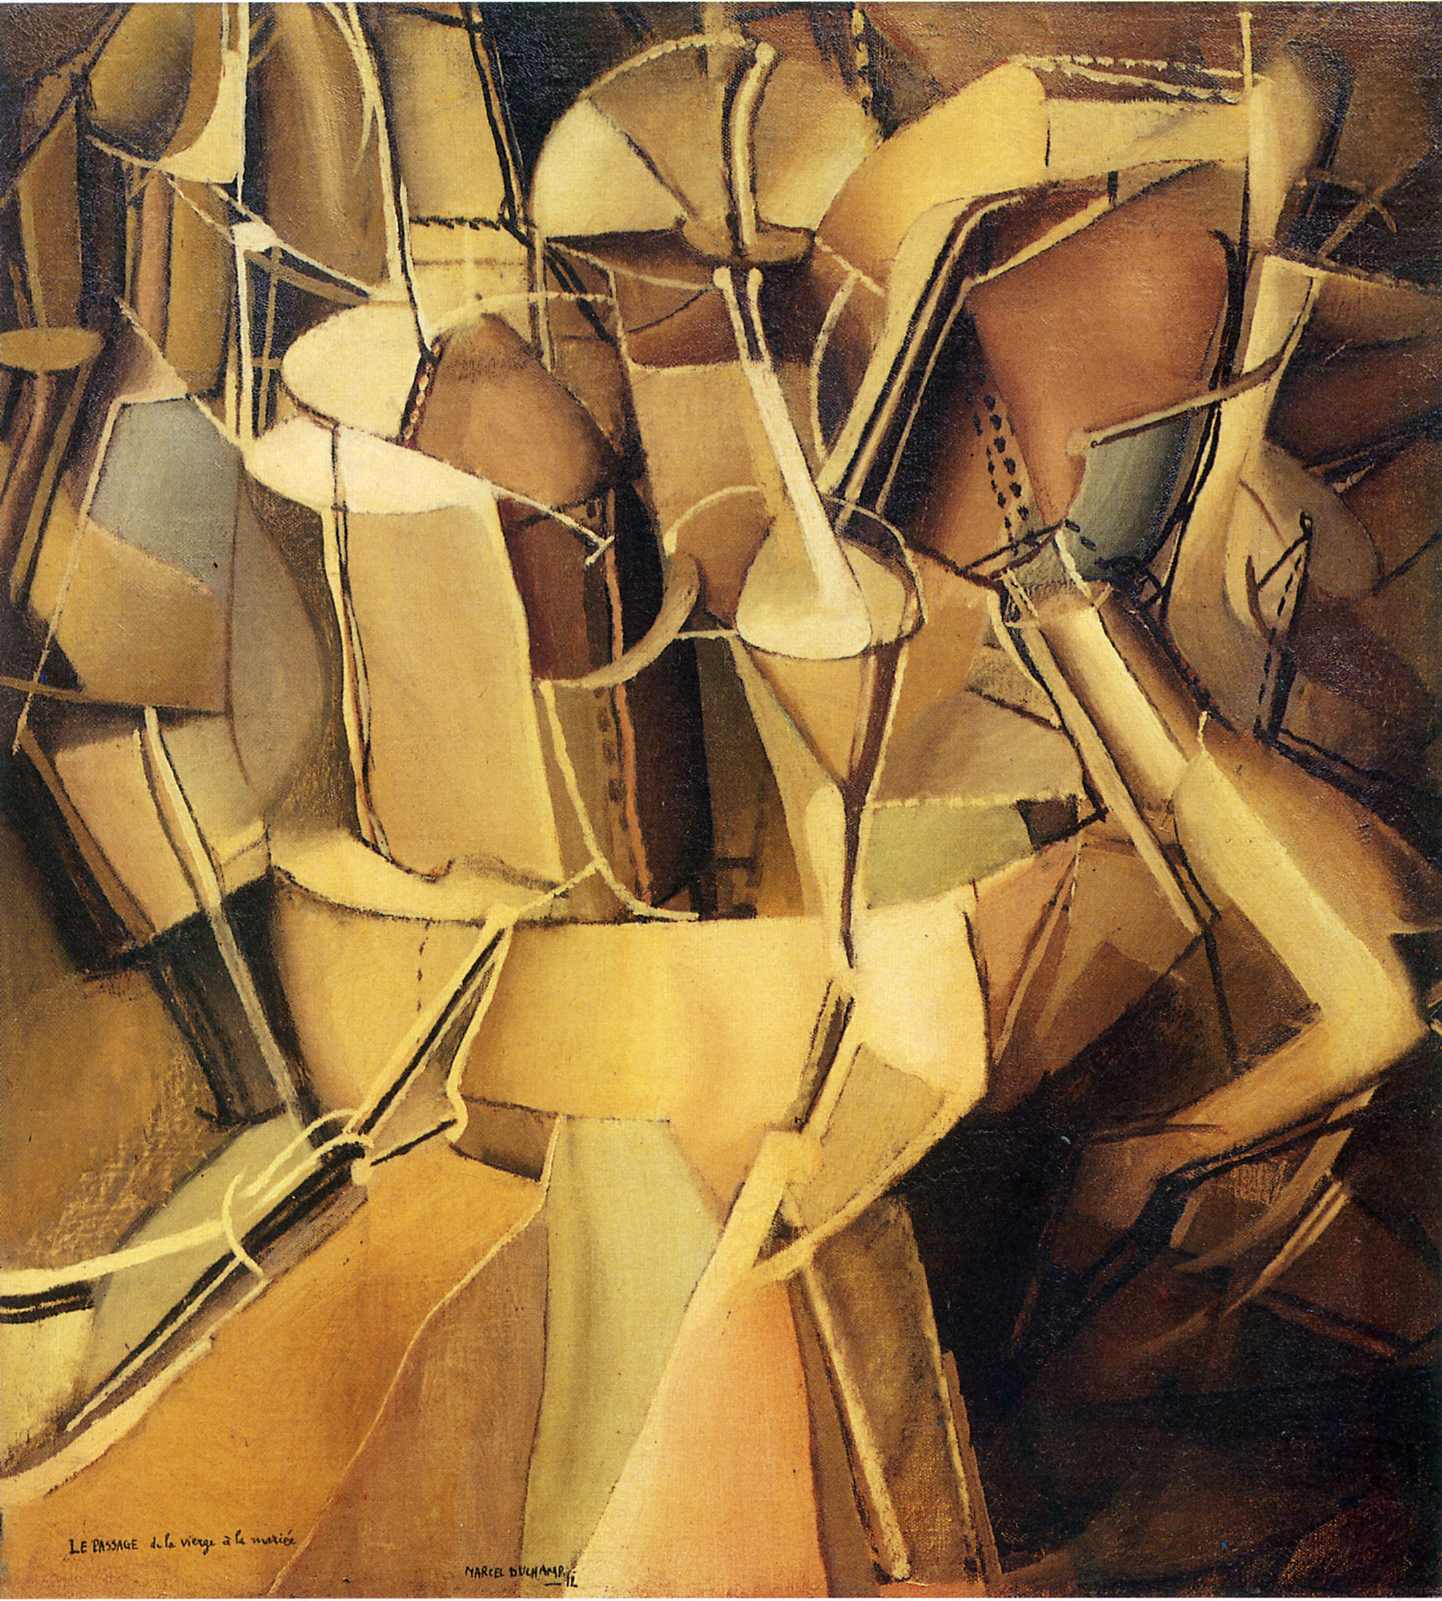 Transition of Virgin into a Bride by Marcel Duchamp - 1912 - 59 x 53.5 cm Museum of Modern Art